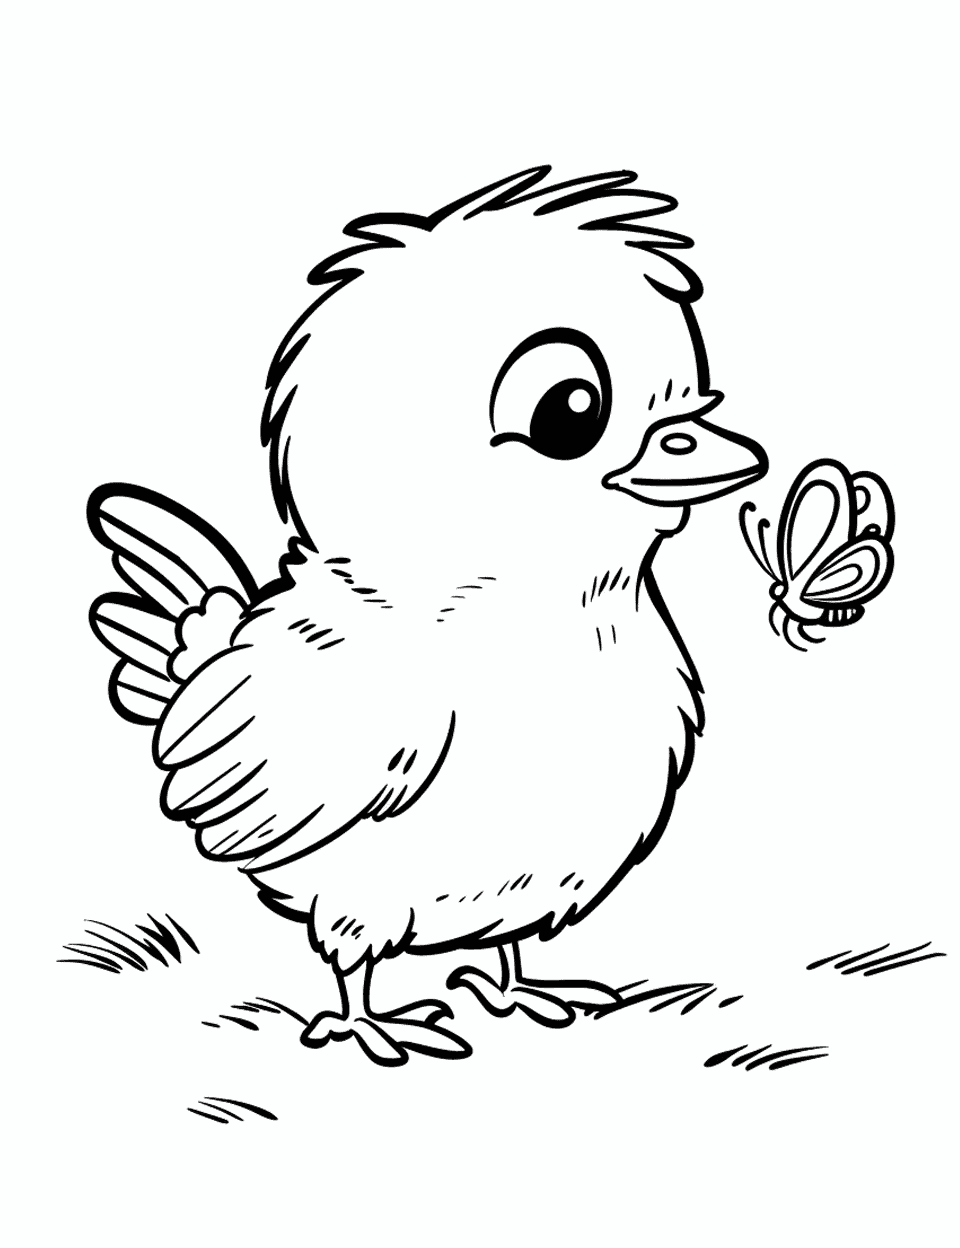 Chick and the Butterfly Chicken Coloring Page - A curious chick looking at a butterfly flying around it.